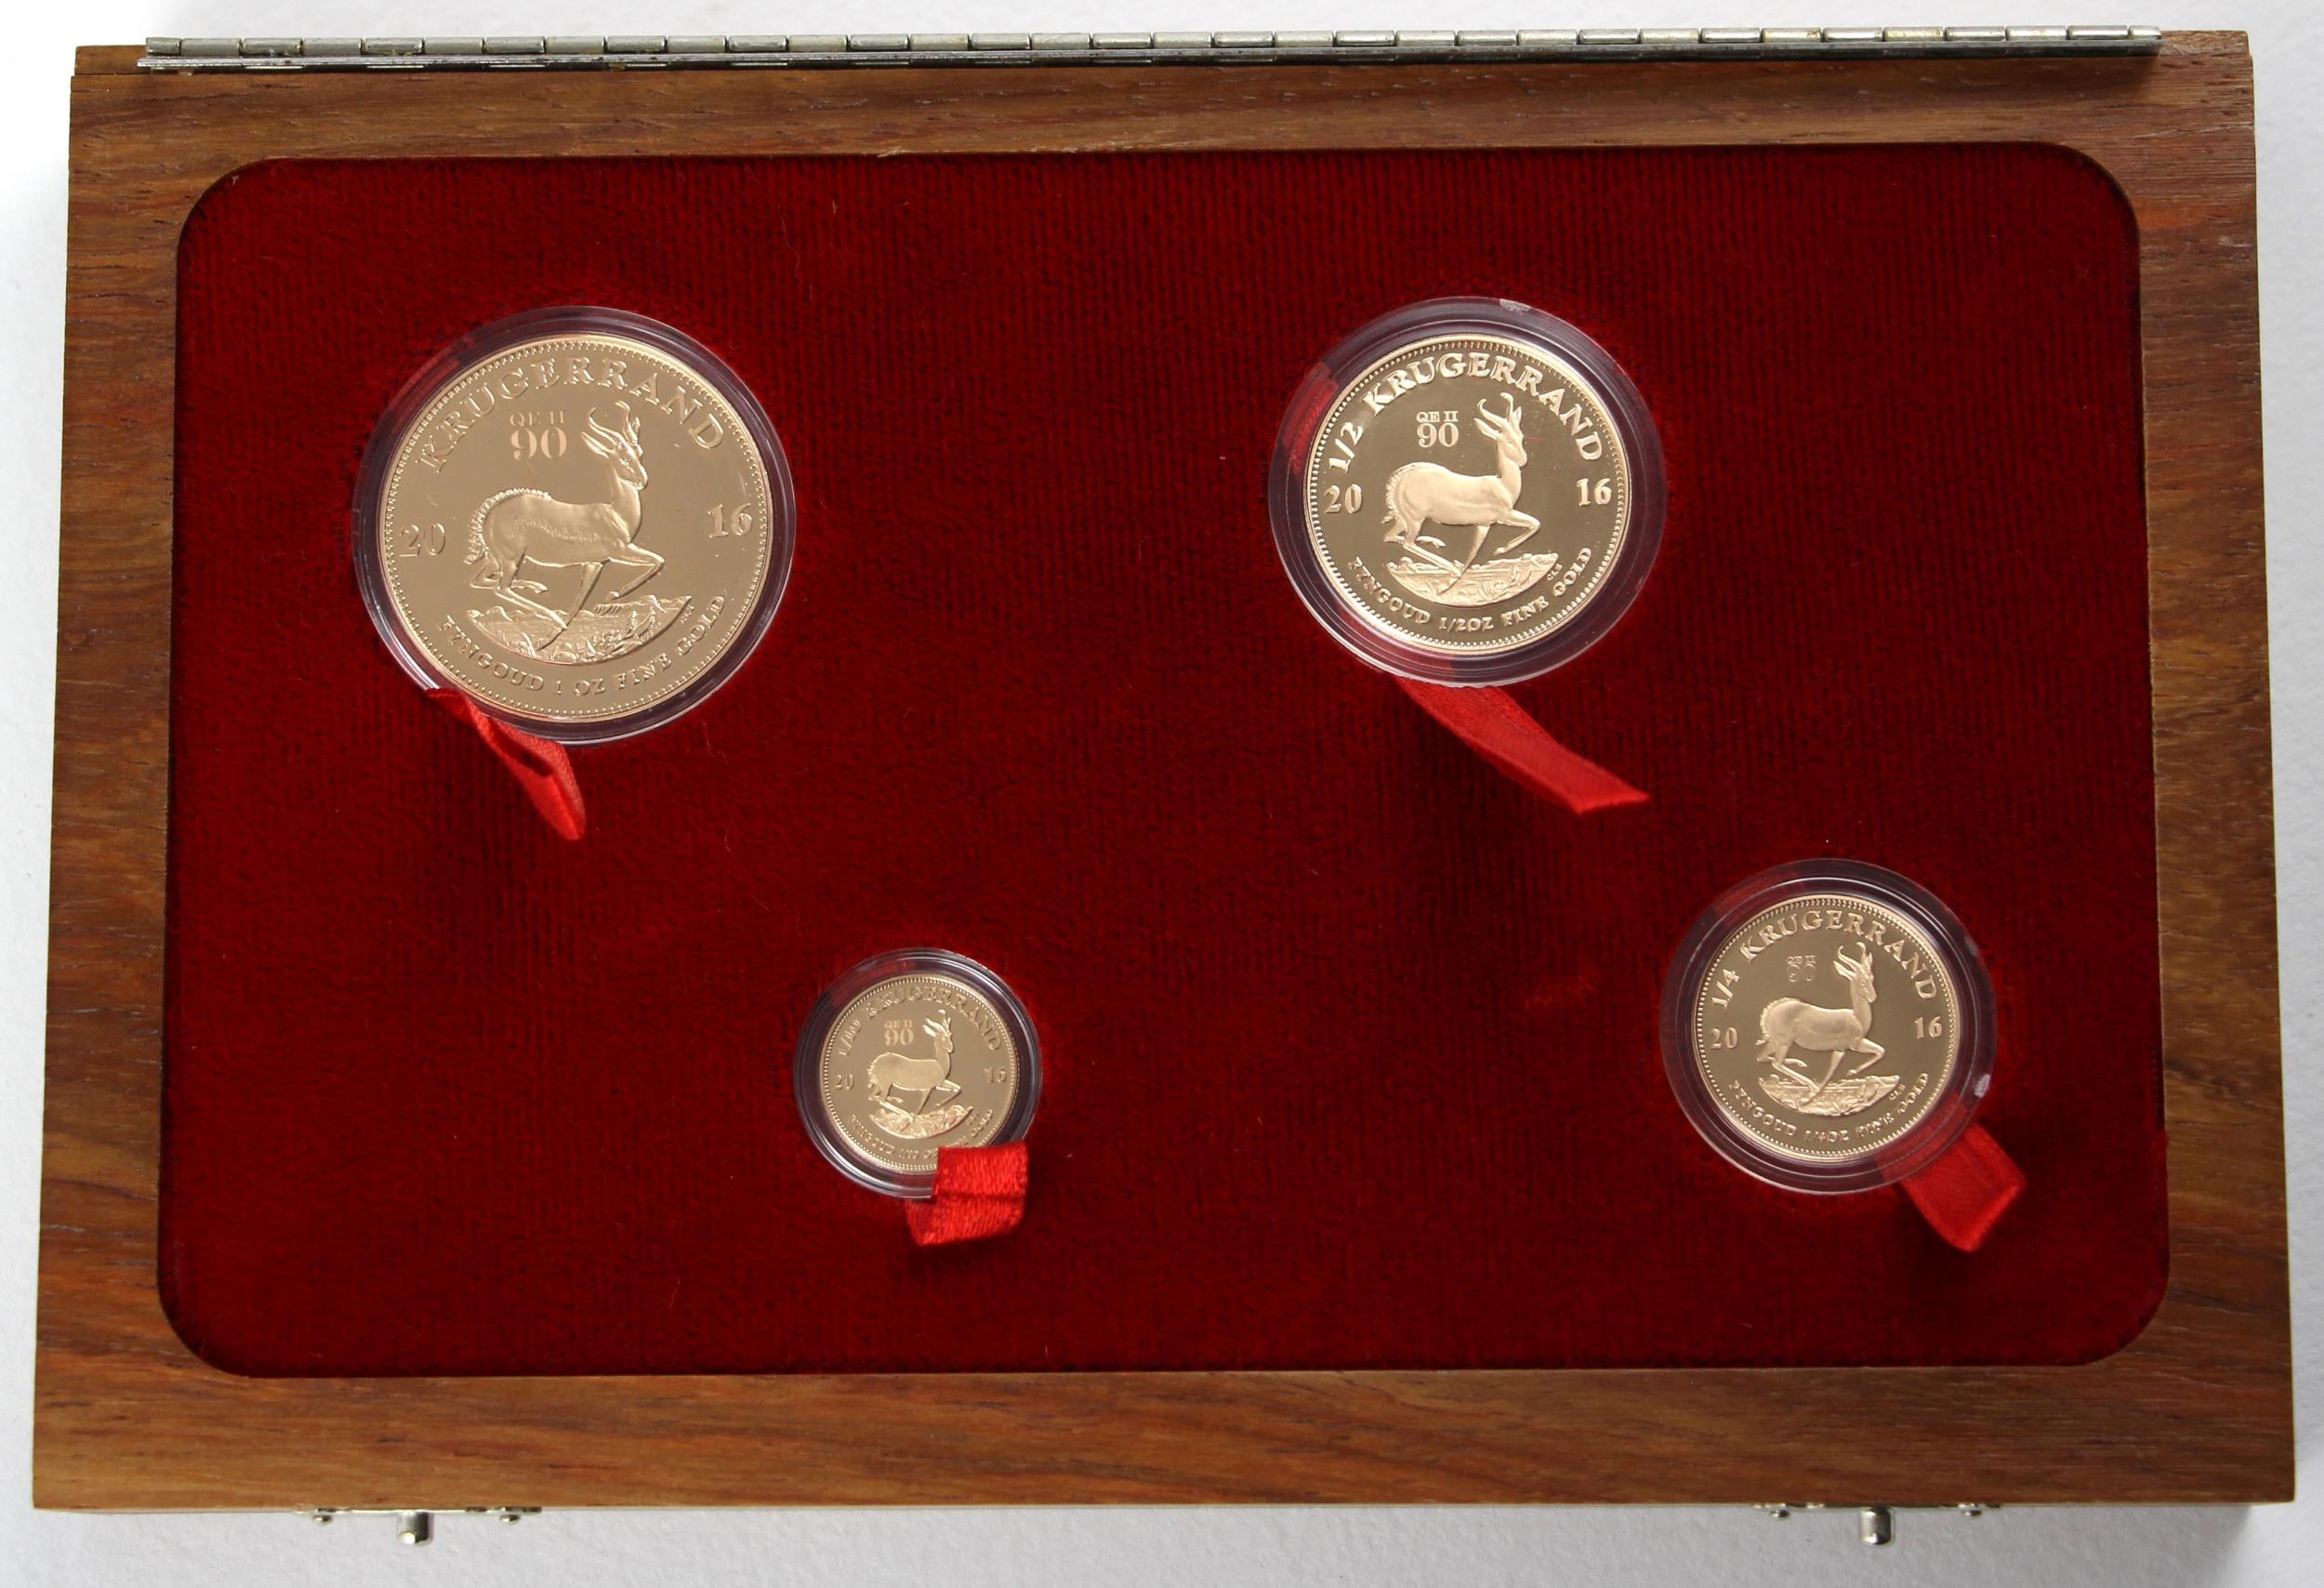 South Africa, Krugerrand collectors set, The 90th Birthday celebration of Queen Elizabeth II, - Image 2 of 3